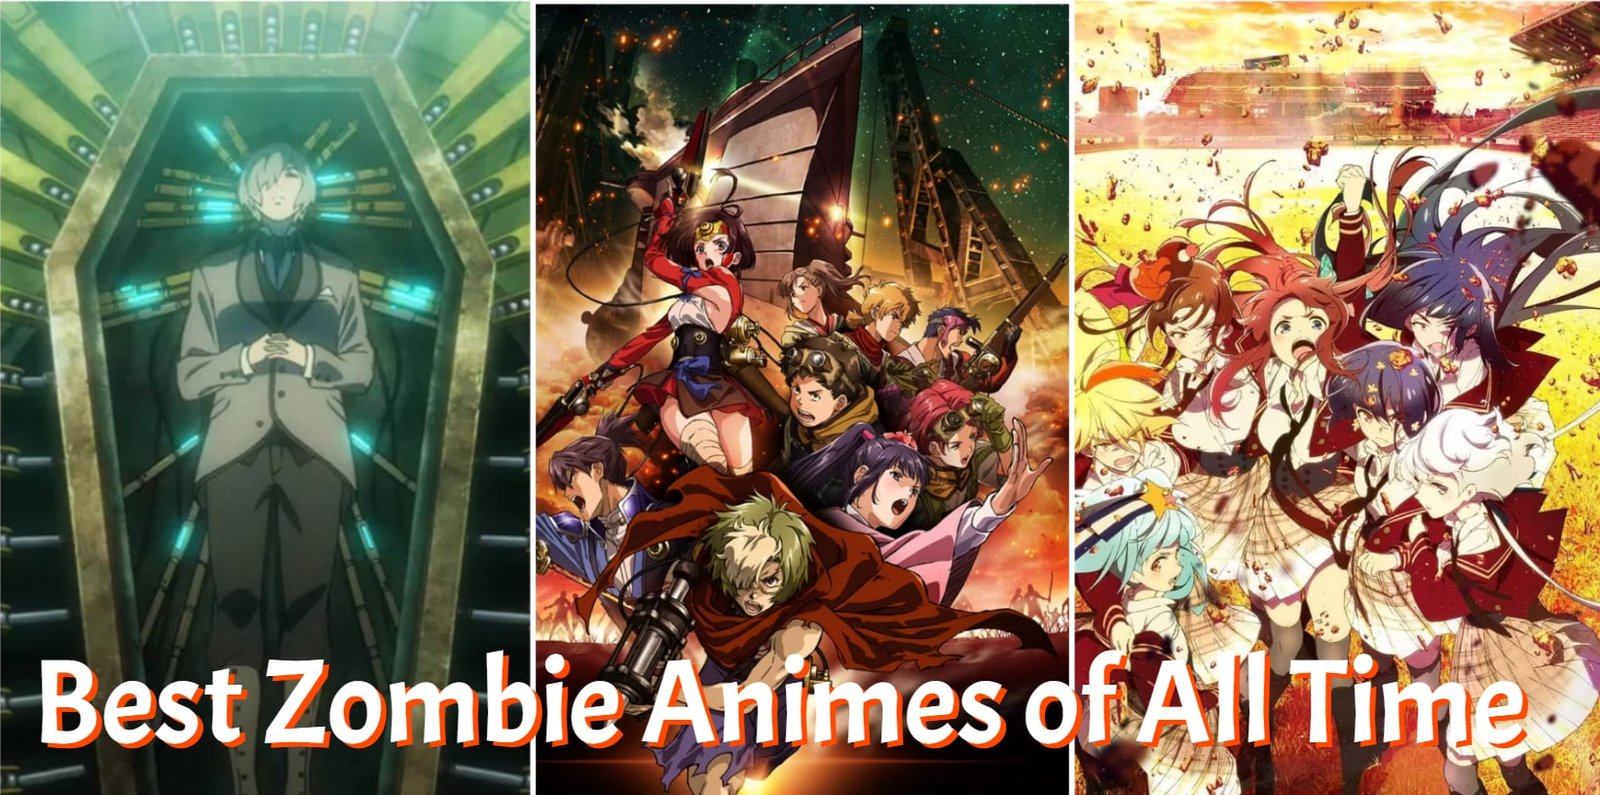 Best Zombie Anime of All Time